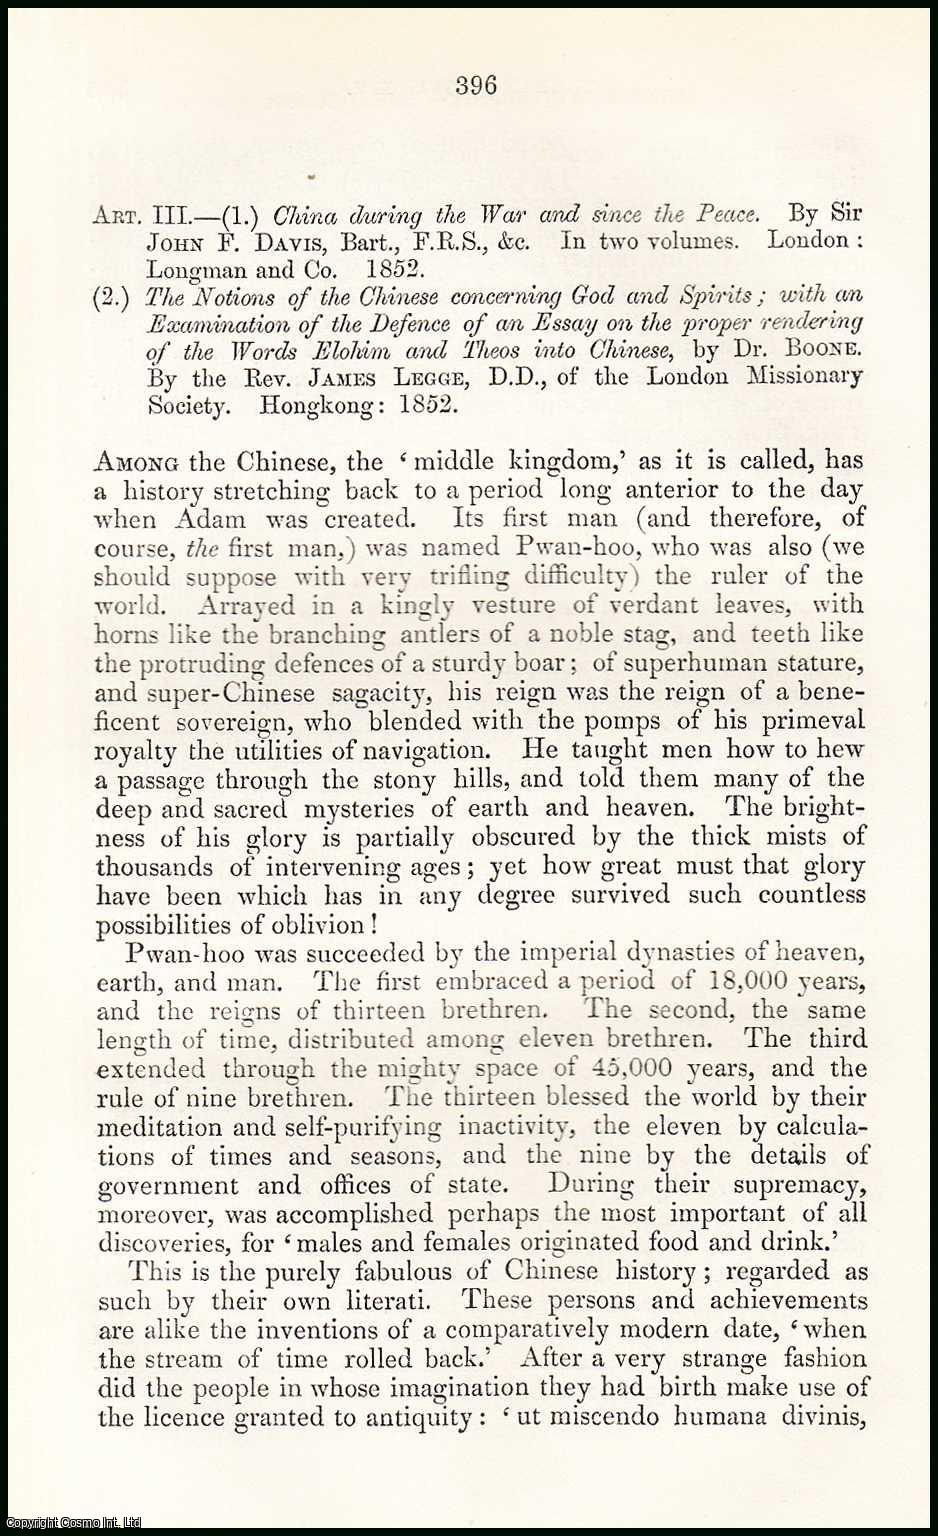 Author Unknown - China - its Civilisation and Religion. A rare original article from the British Quarterly Review, 1852.